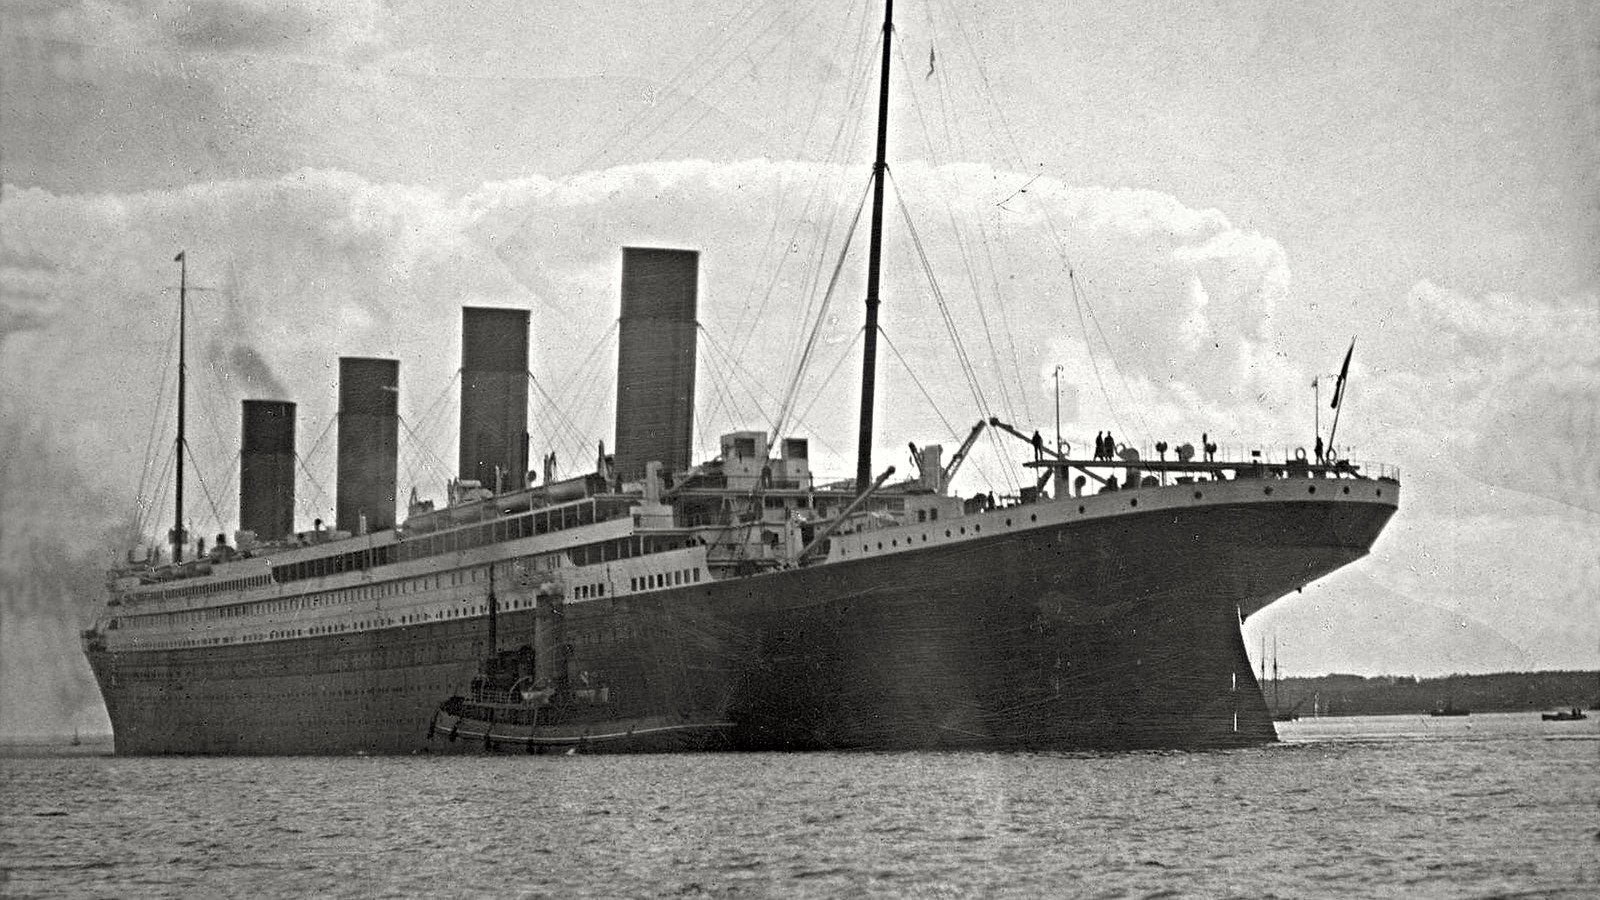 The Truth About The Person Who Photographed The Titanic Disaster